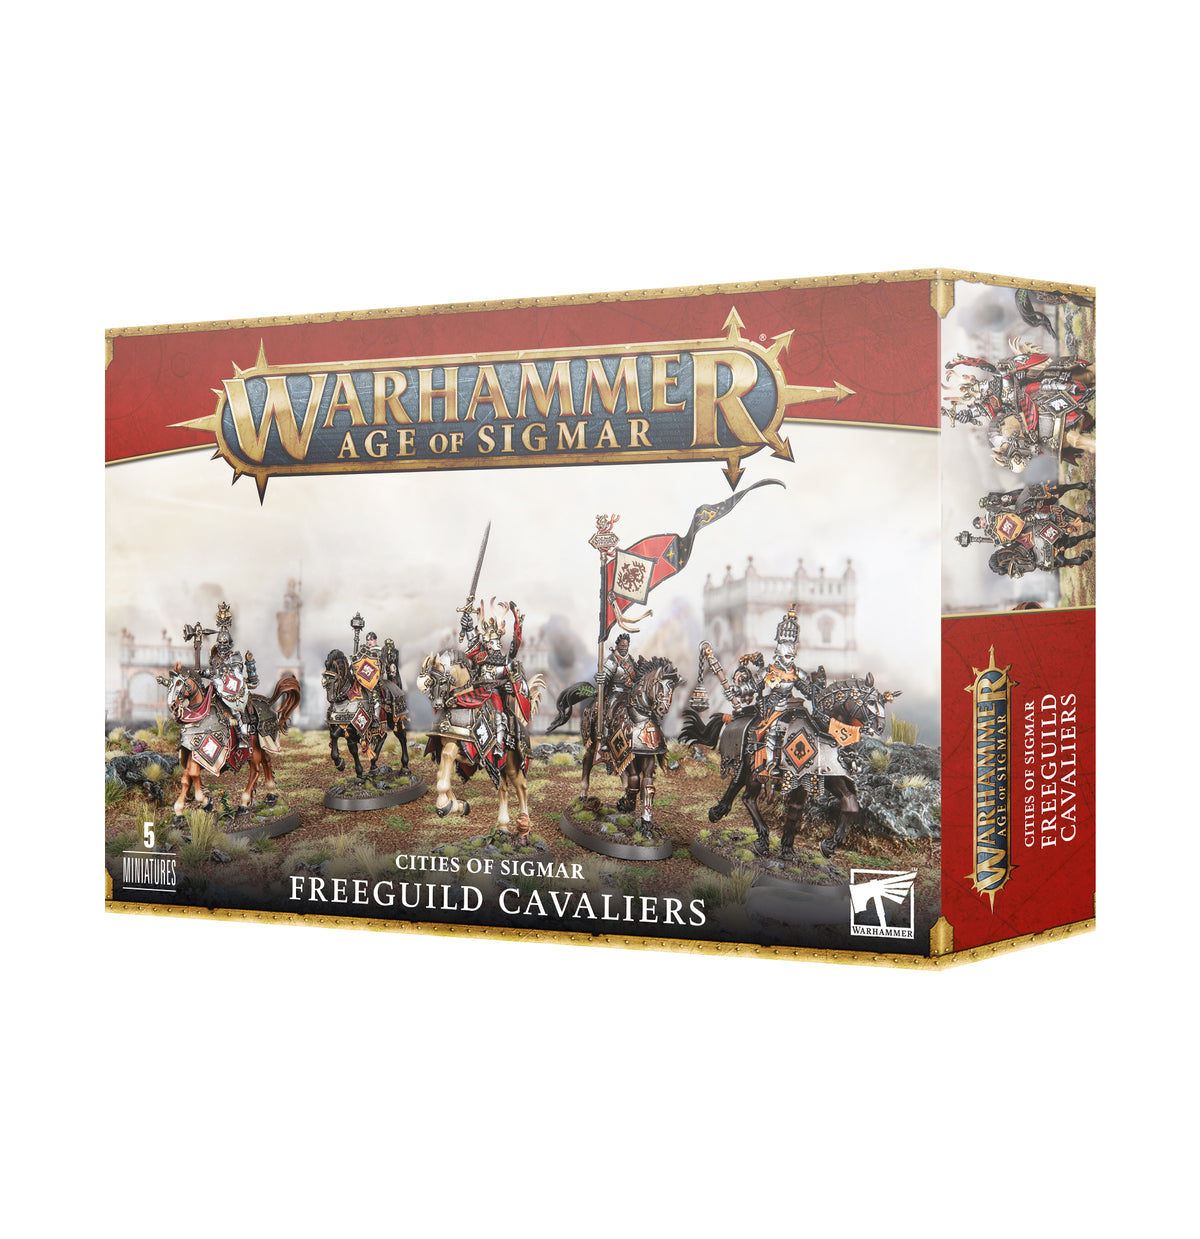 Warhammer Age Of Sigmar: CITIES OF SIGMAR: FREEGUILD CAVALIERS